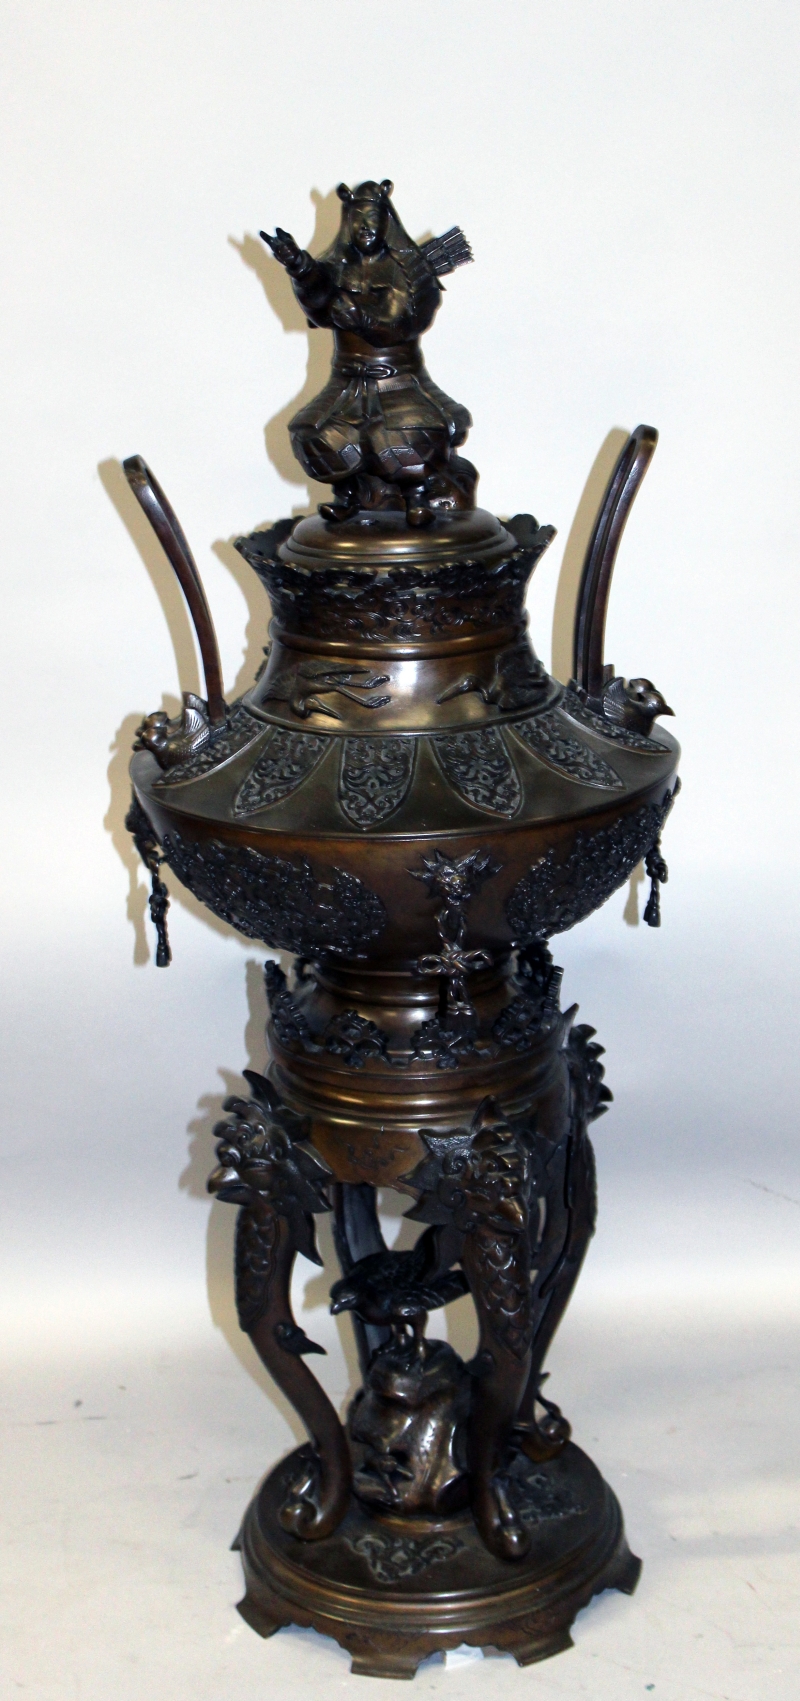 A LARGE & IMPRESSIVE JAPANESE MEIJI PERIOD BRONZE KORO & COVER ON STAND, the koro with upright